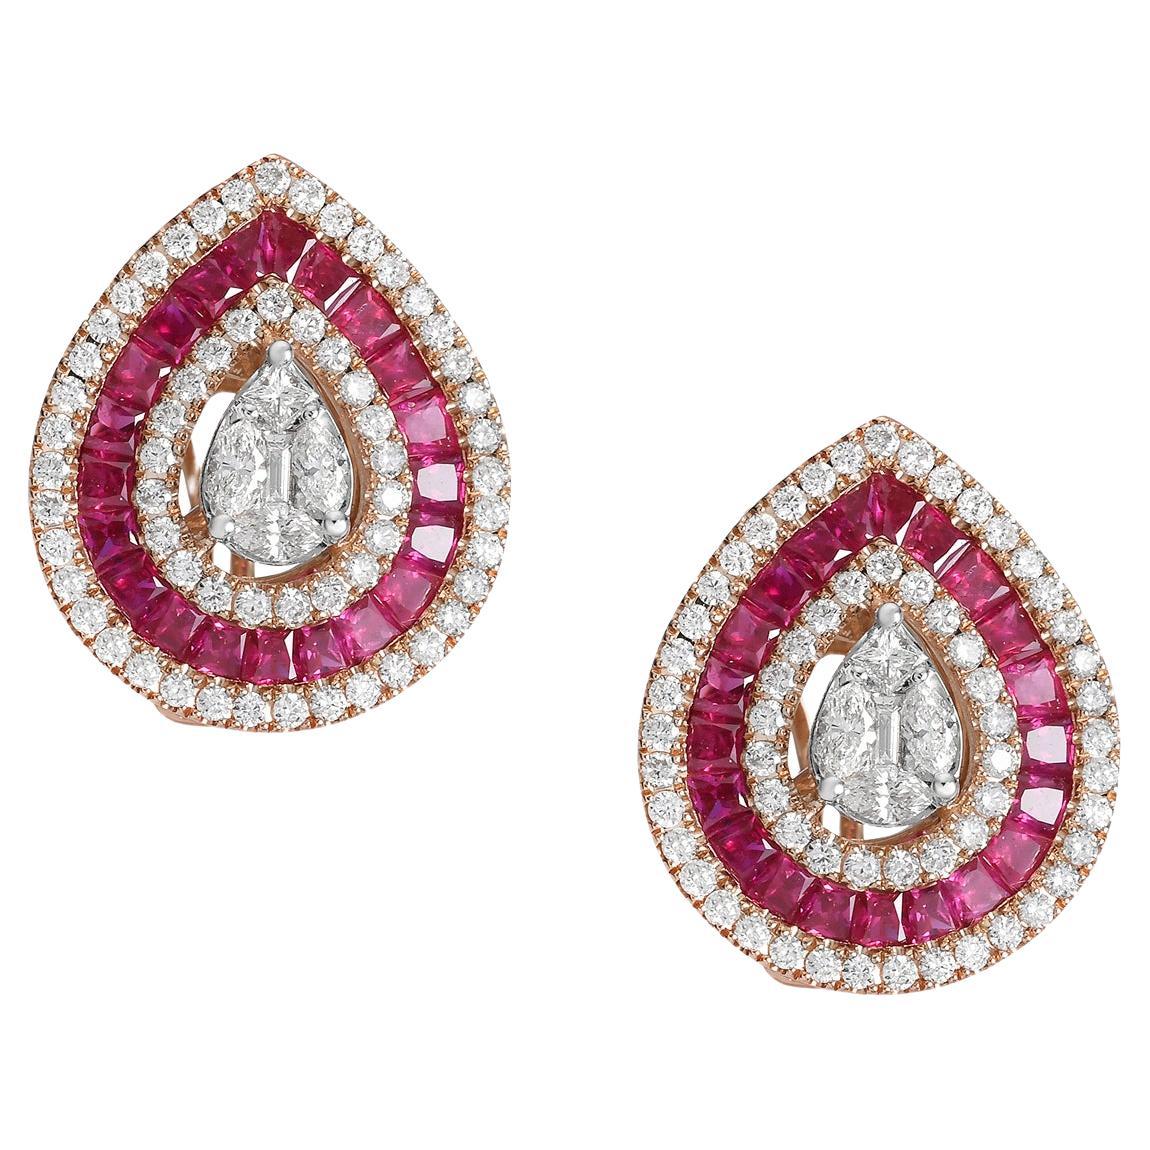 2.37 Ct Ruby Pear Shaped Studs With Diamonds Made In 18k Gold